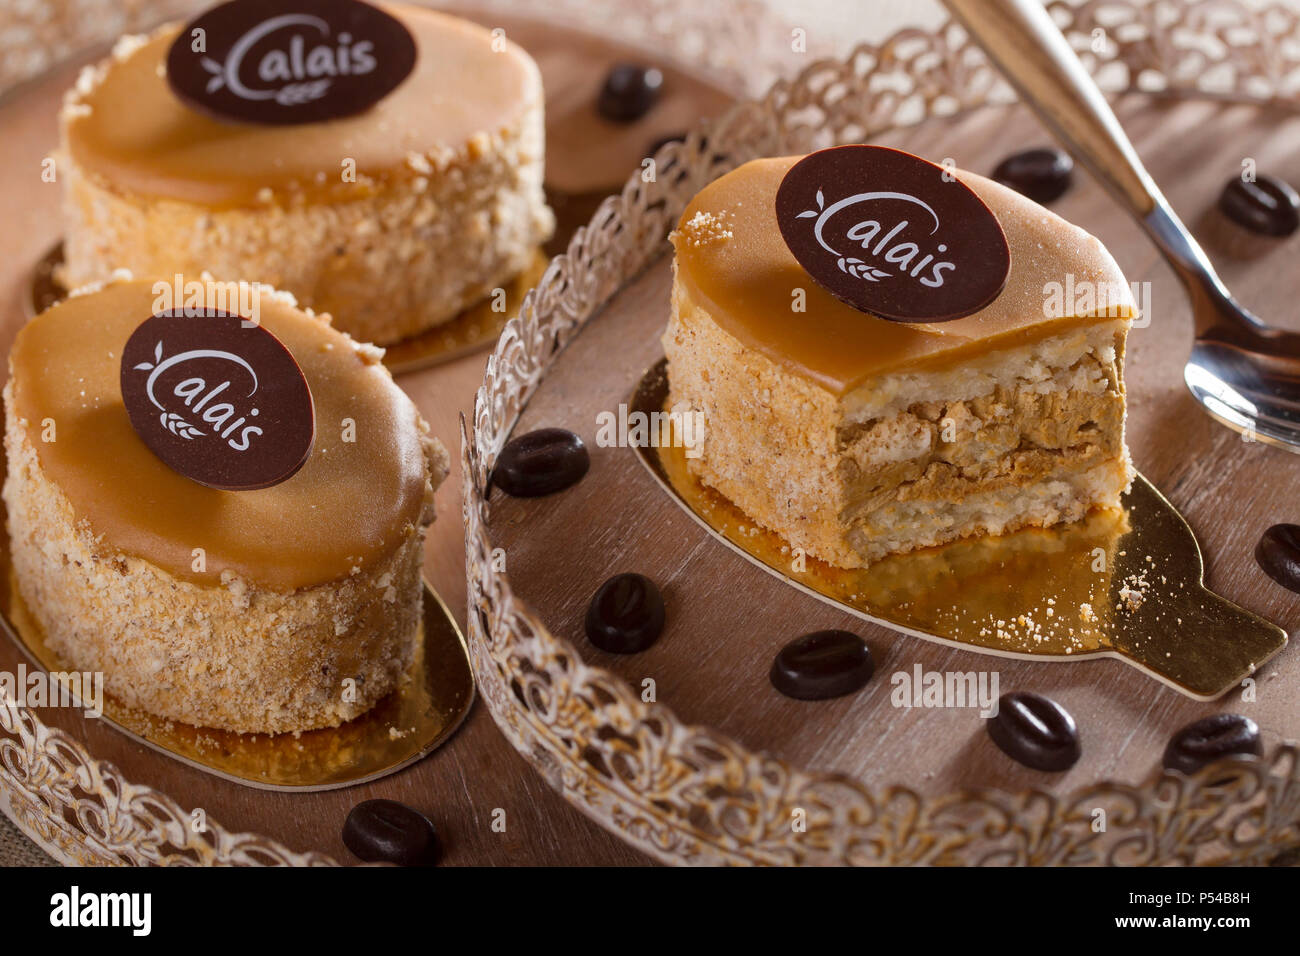 Calais”, coffee cake, speciality from the Nord-Pas-de-Calais region (northern France) Stock Photo